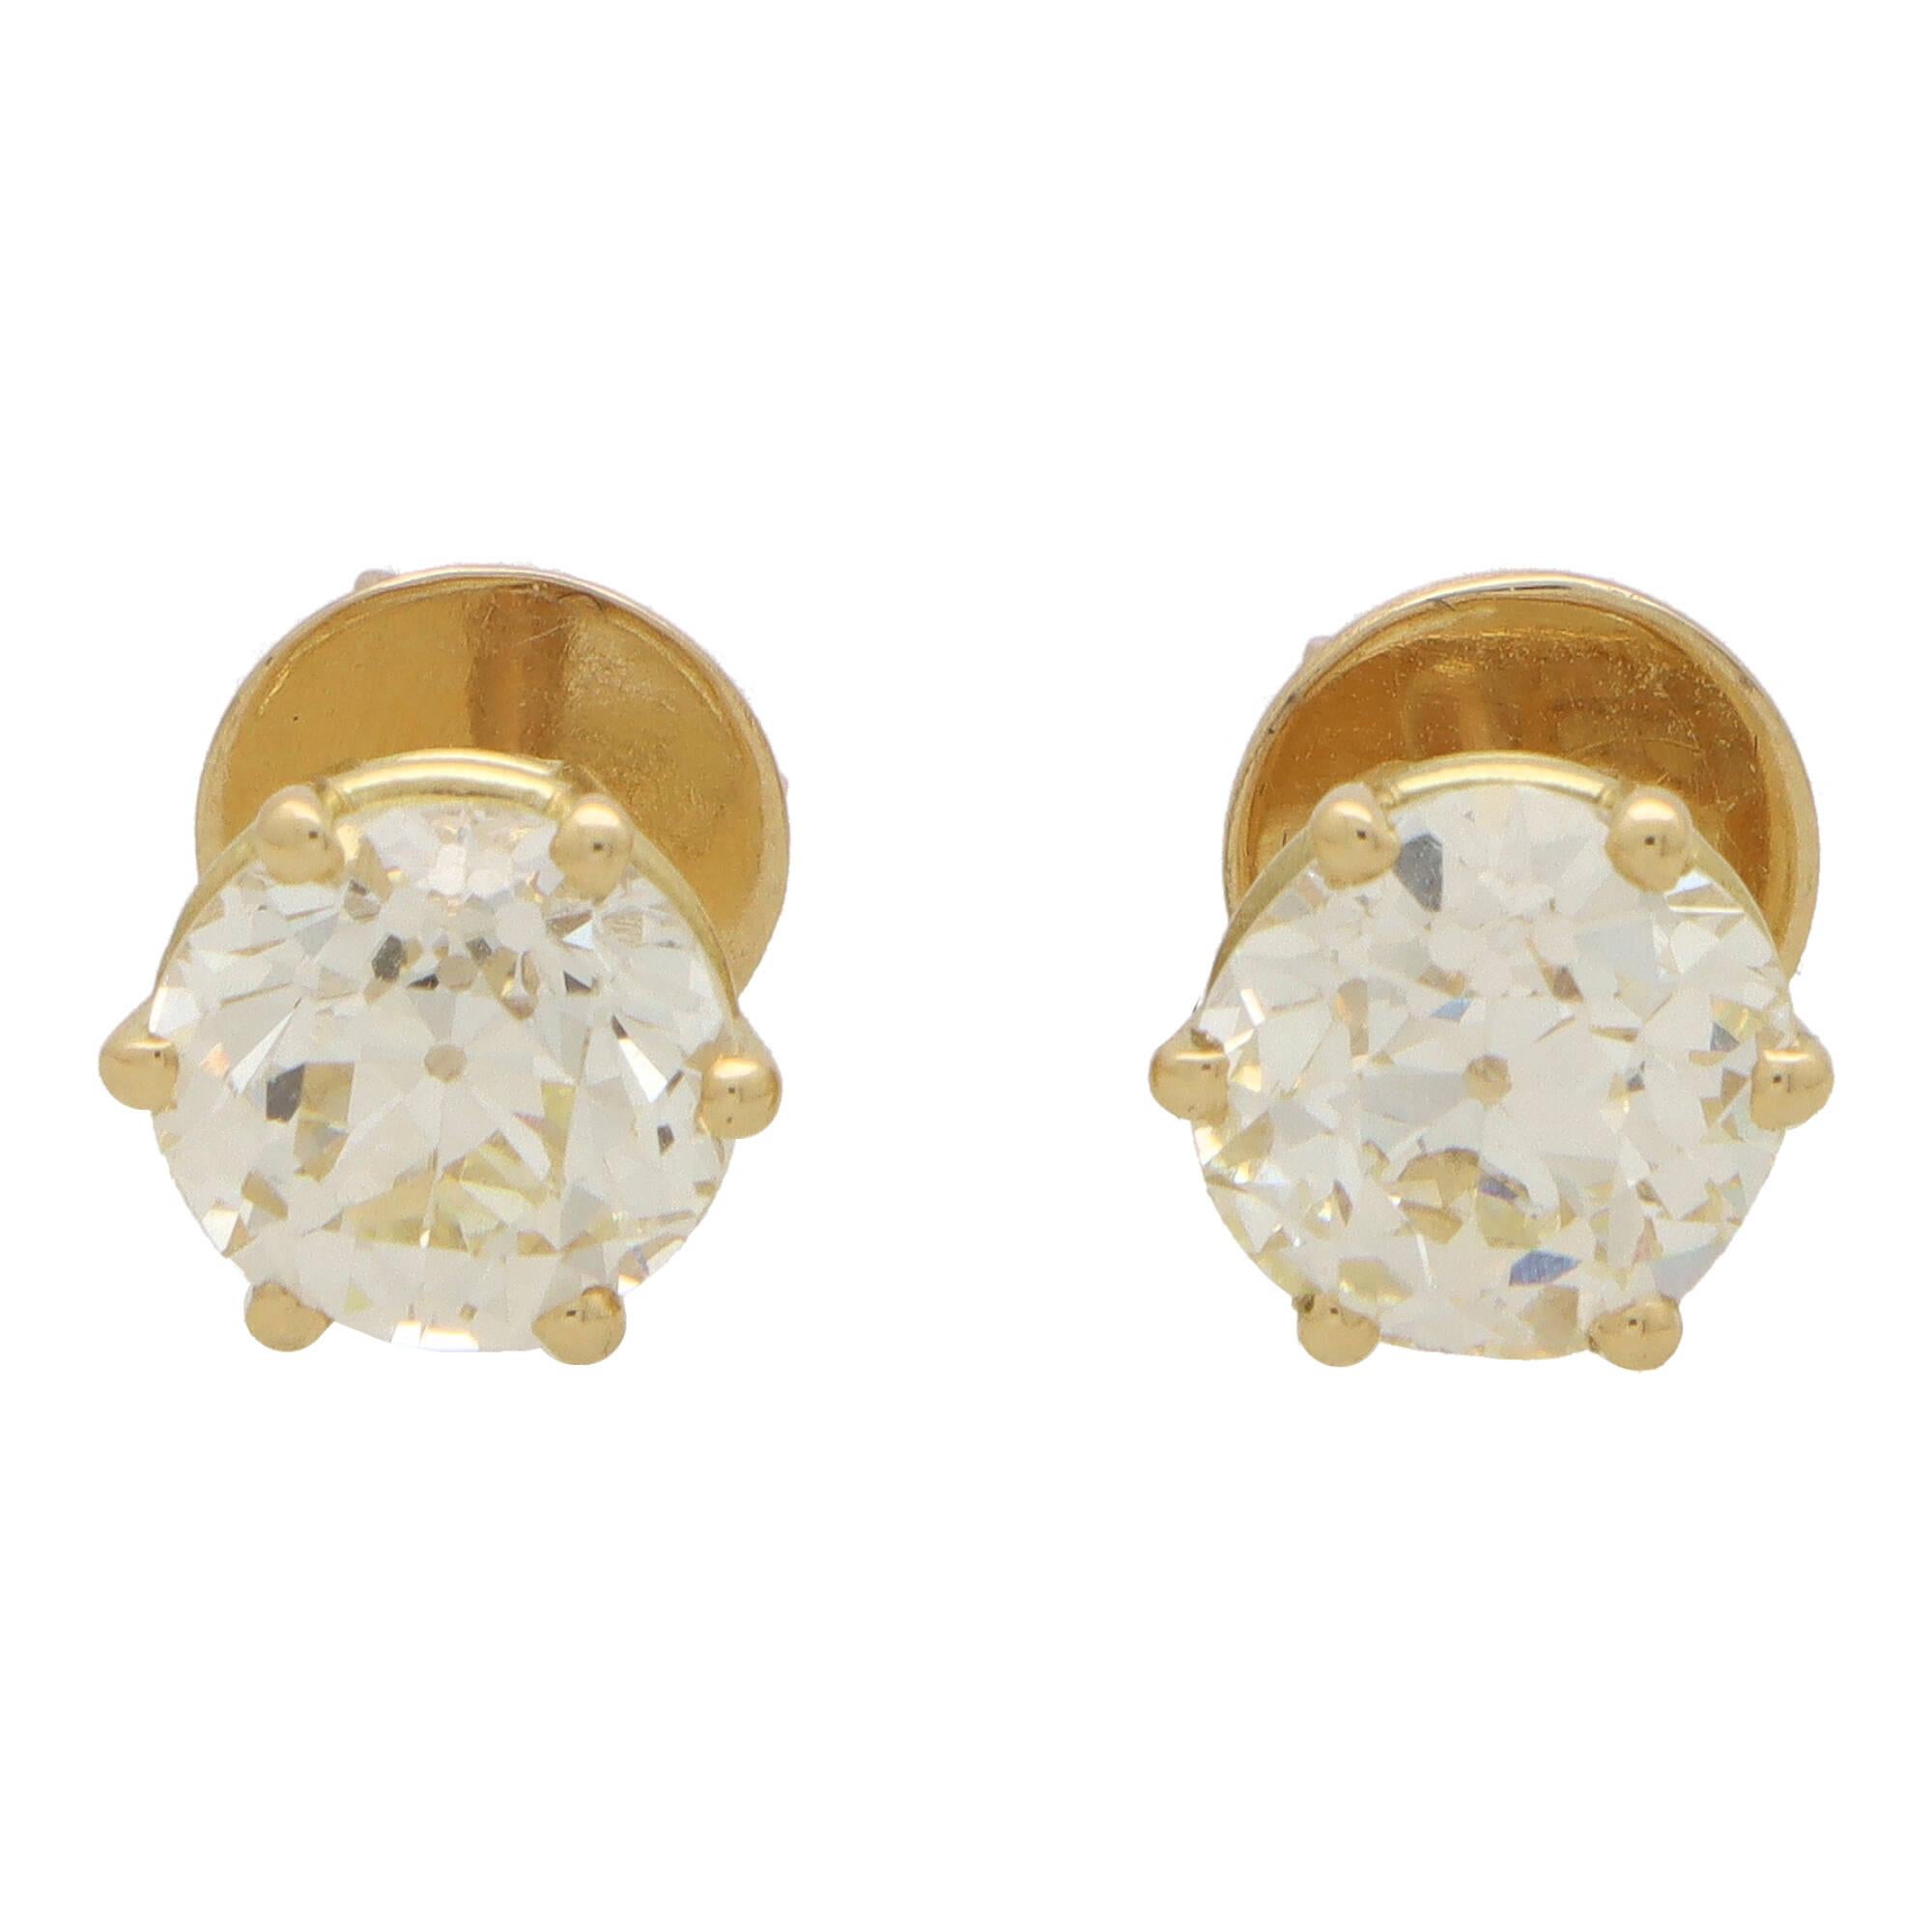 A magnificent pair of old cut diamond stud earrings set in platinum.

Matching perfectly in their incredible sparkle and brilliance, each earring features a beautiful old cut diamond which is four claw set securely in an open back setting. The